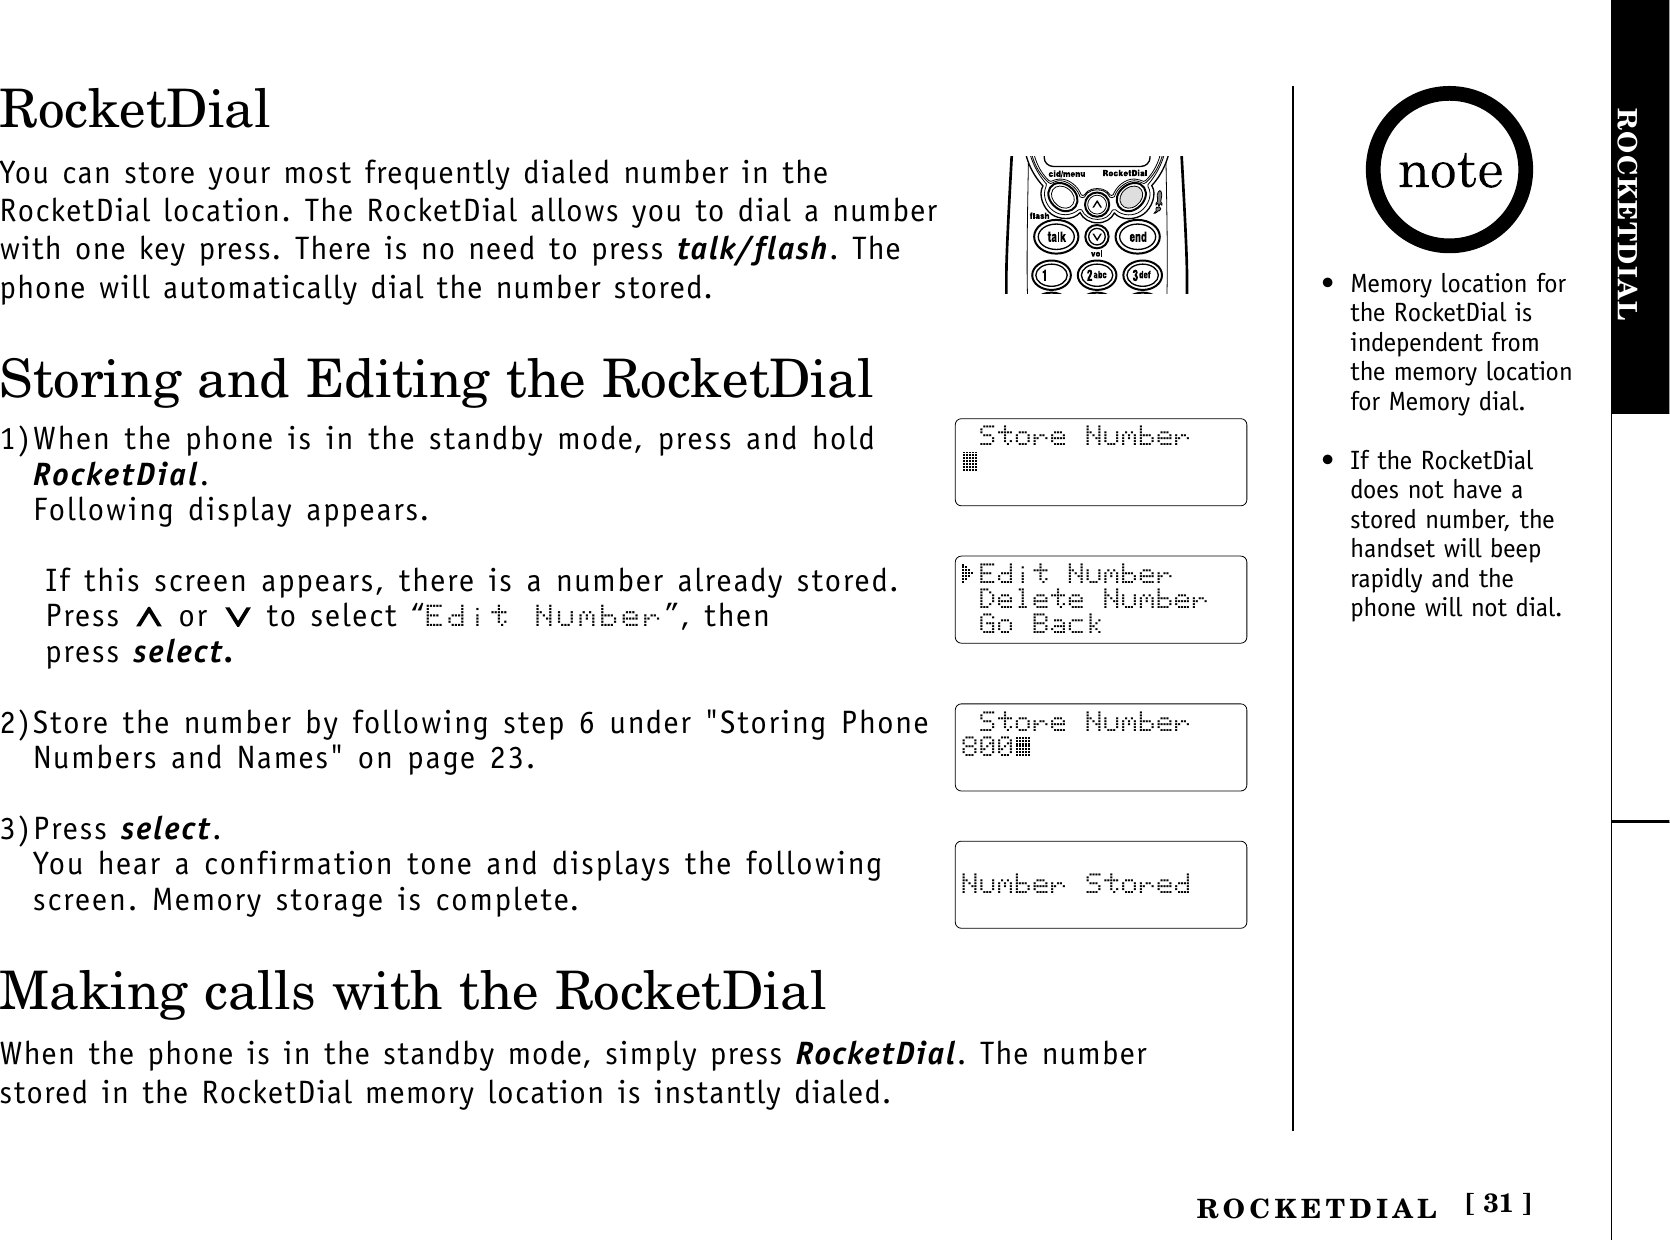 [ 31 ]ROCKETDIALROCKETDIALRocketDialYou can store your most frequently dialed number in theRocketDial location. The RocketDial allows you to dial a numberwith one key press. There is no need to press talk/flash. Thephone will automatically dial the number stored.Storing and Editing the RocketDial1)When the phone is in the standby mode, press and hold RocketDial.Following display appears.If this screen appears, there is a number already stored.Press  or  to select “Edit Number”, then press select.2)Store the number by following step 6 under &quot;Storing PhoneNumbers and Names&quot; on page 23.3)Press select.You hear a confirmation tone and displays the followingscreen. Memory storage is complete.Making calls with the RocketDialWhen the phone is in the standby mode, simply press RocketDial. The numberstored in the RocketDial memory location is instantly dialed. Store Number Edit Number Delete Number Go Back Number Stored Store Number800• Memory location for the RocketDial isindependent fromthe memory locationfor Memory dial.• If the RocketDialdoes not have astored number, thehandset will beeprapidly and thephone will not dial.